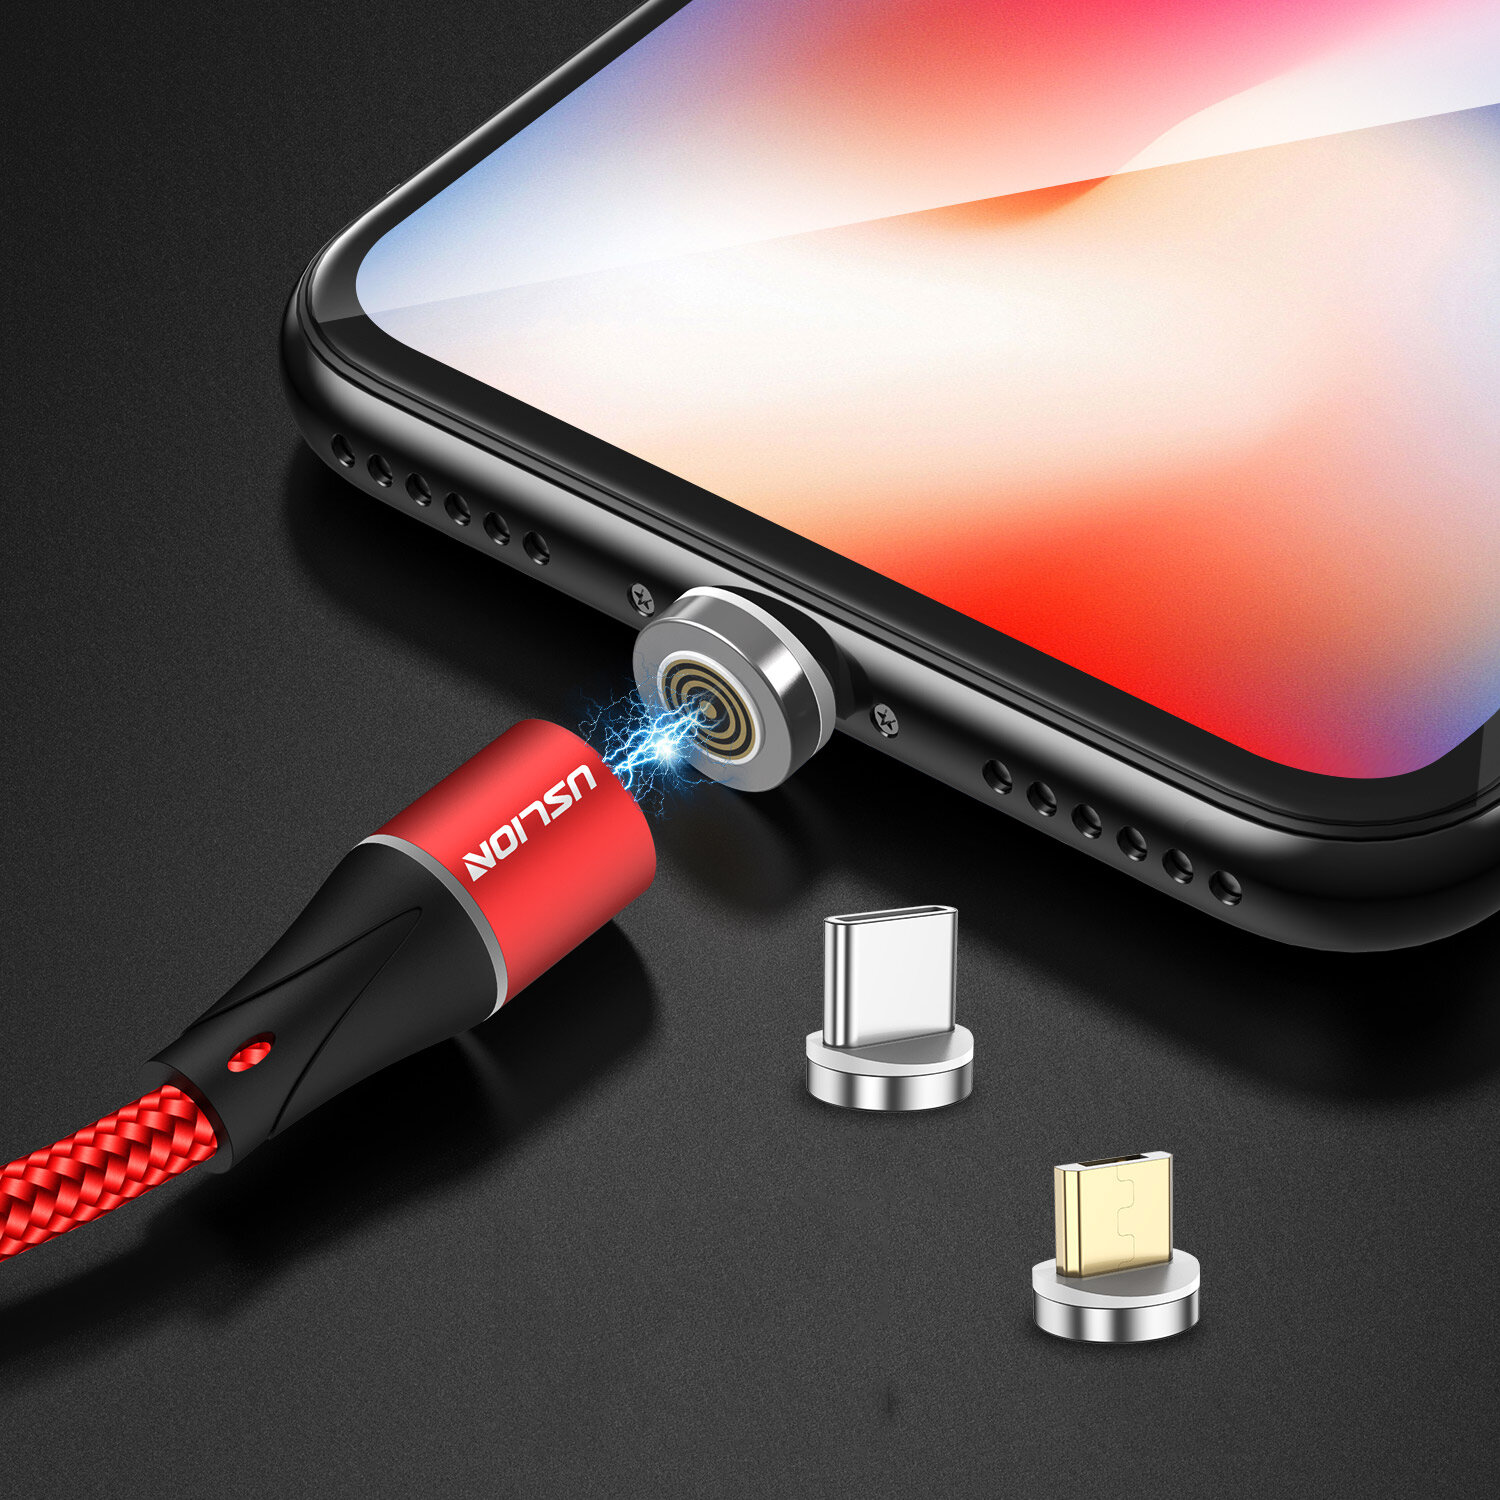 

USLION 3A LED 360 Degree Rotate QC3.0 Magnetic Fast Charging Type-C Micro USB Data Cable 1M for Samsung S10+ S9 9T Note8